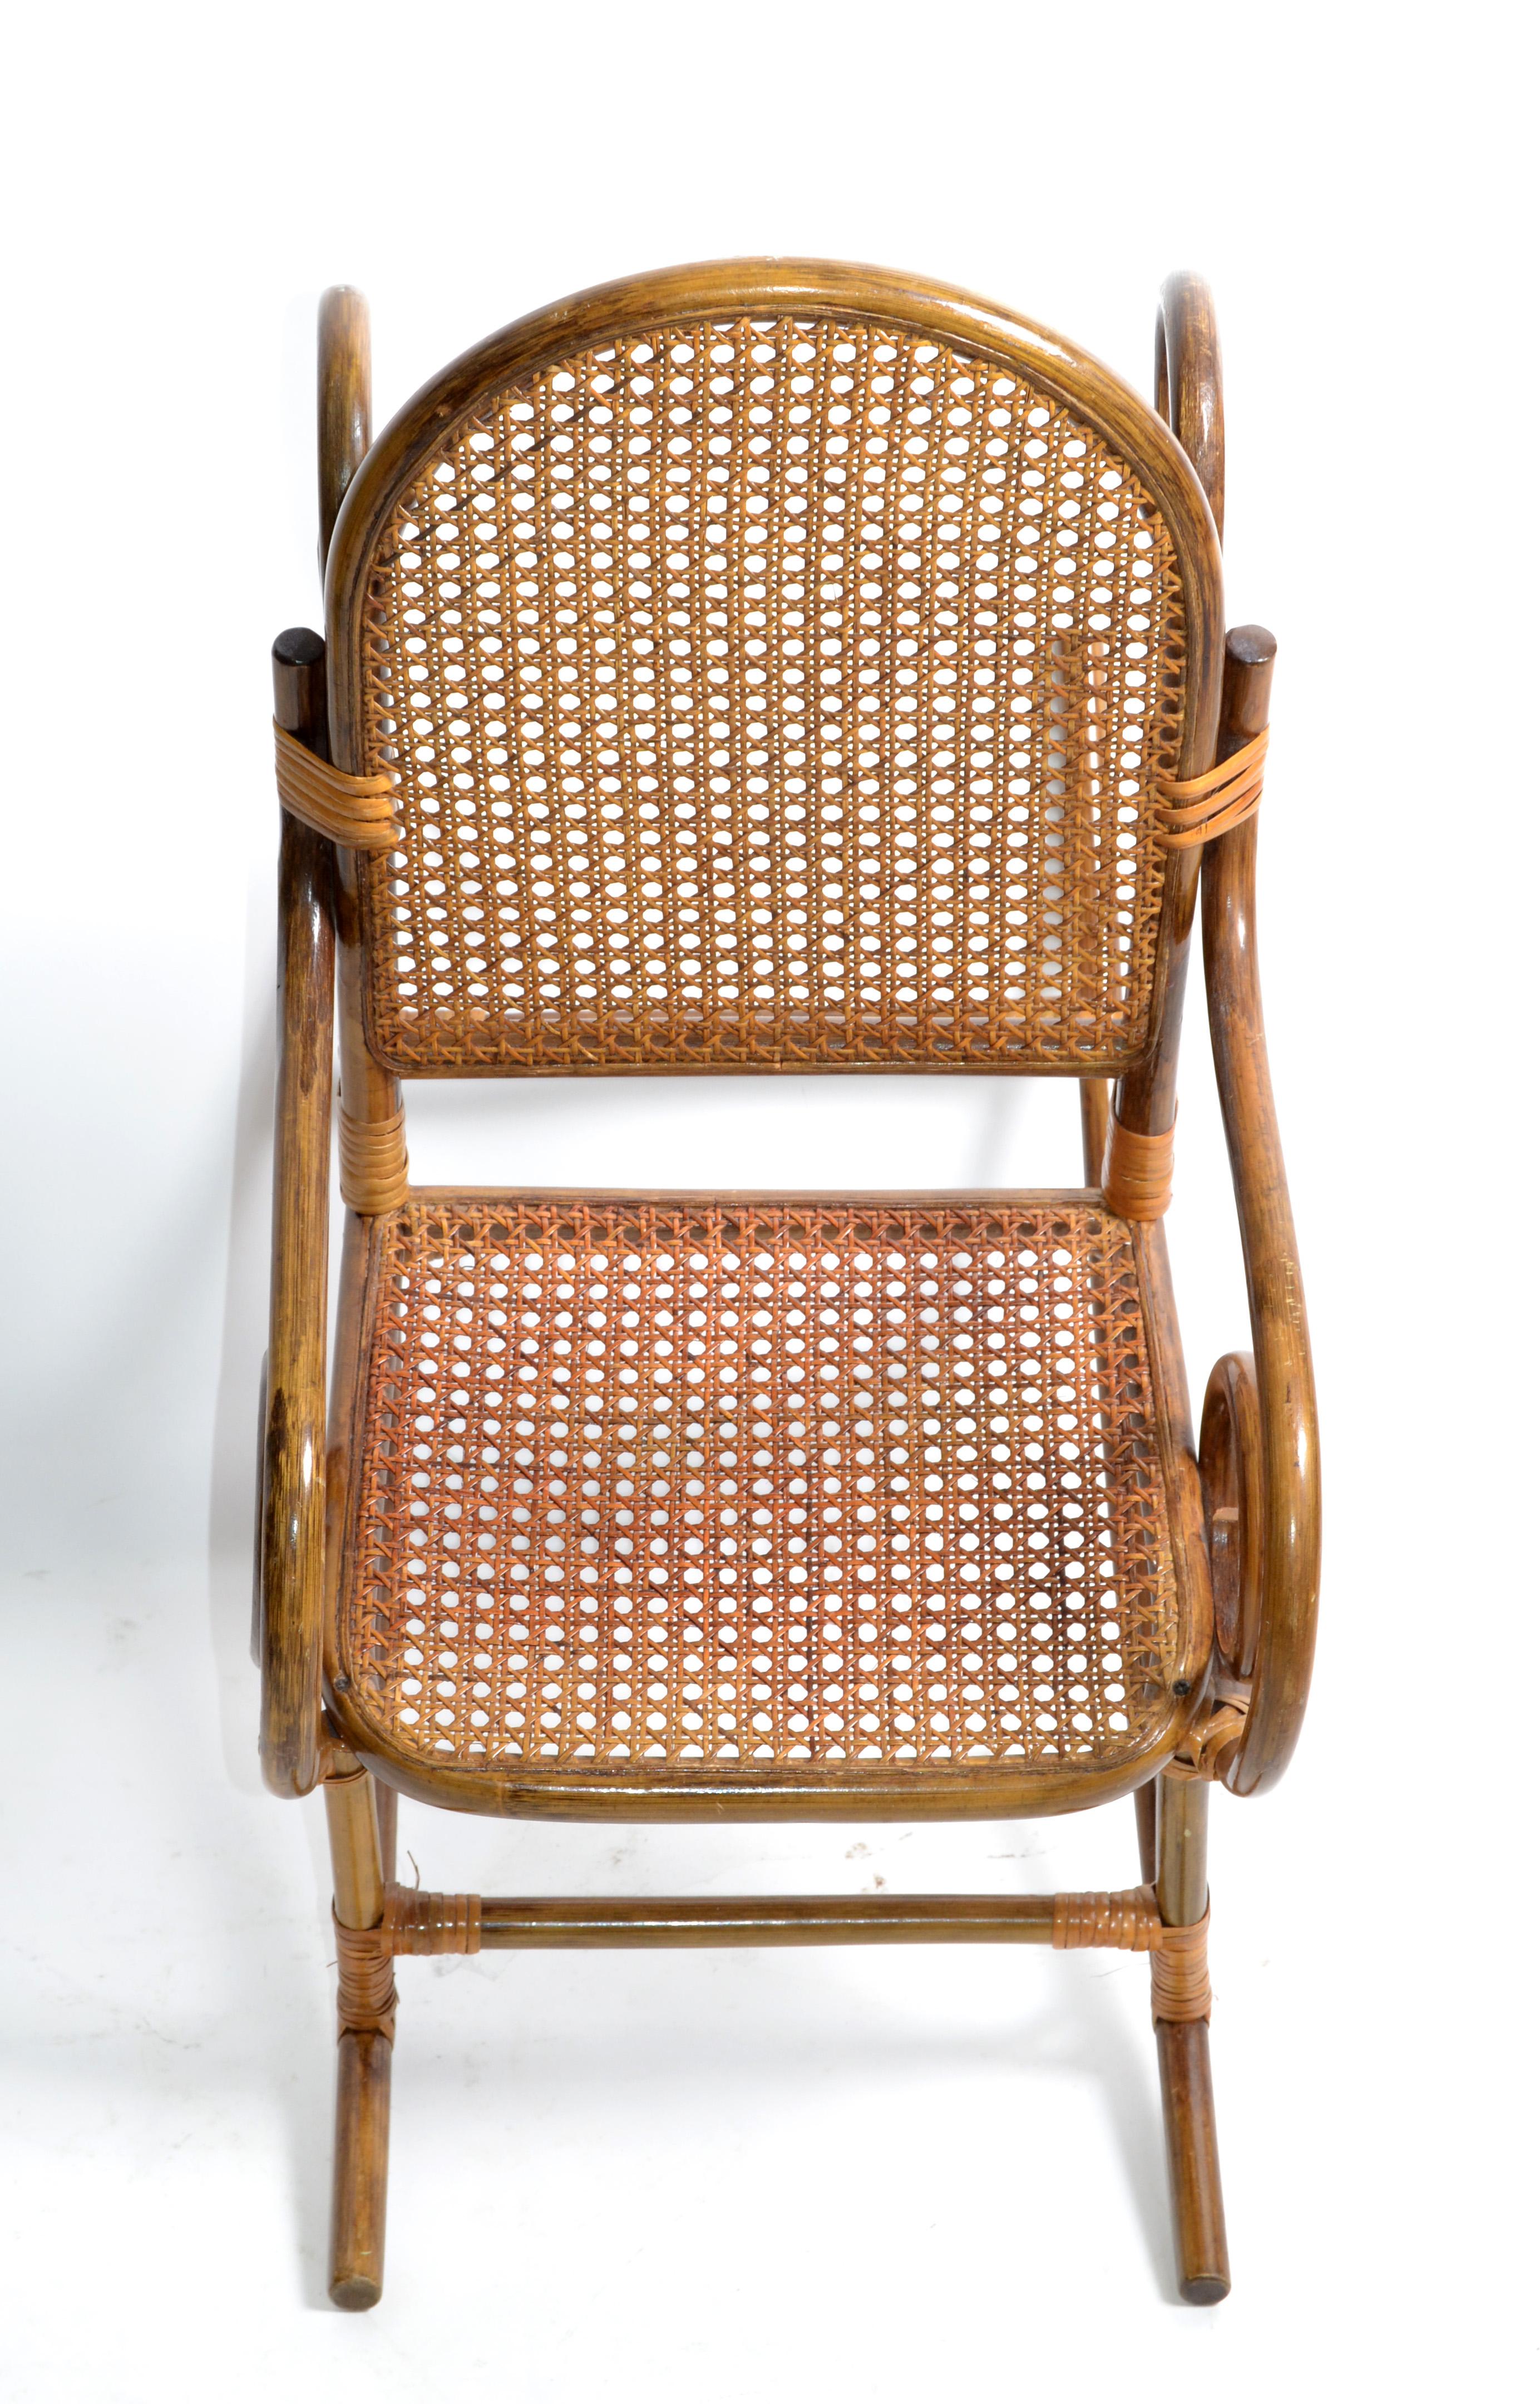 Hand-Woven Mid-Century Modern Bohemian Chic Style Bamboo & Cane Children Rocking Chair 1960 For Sale